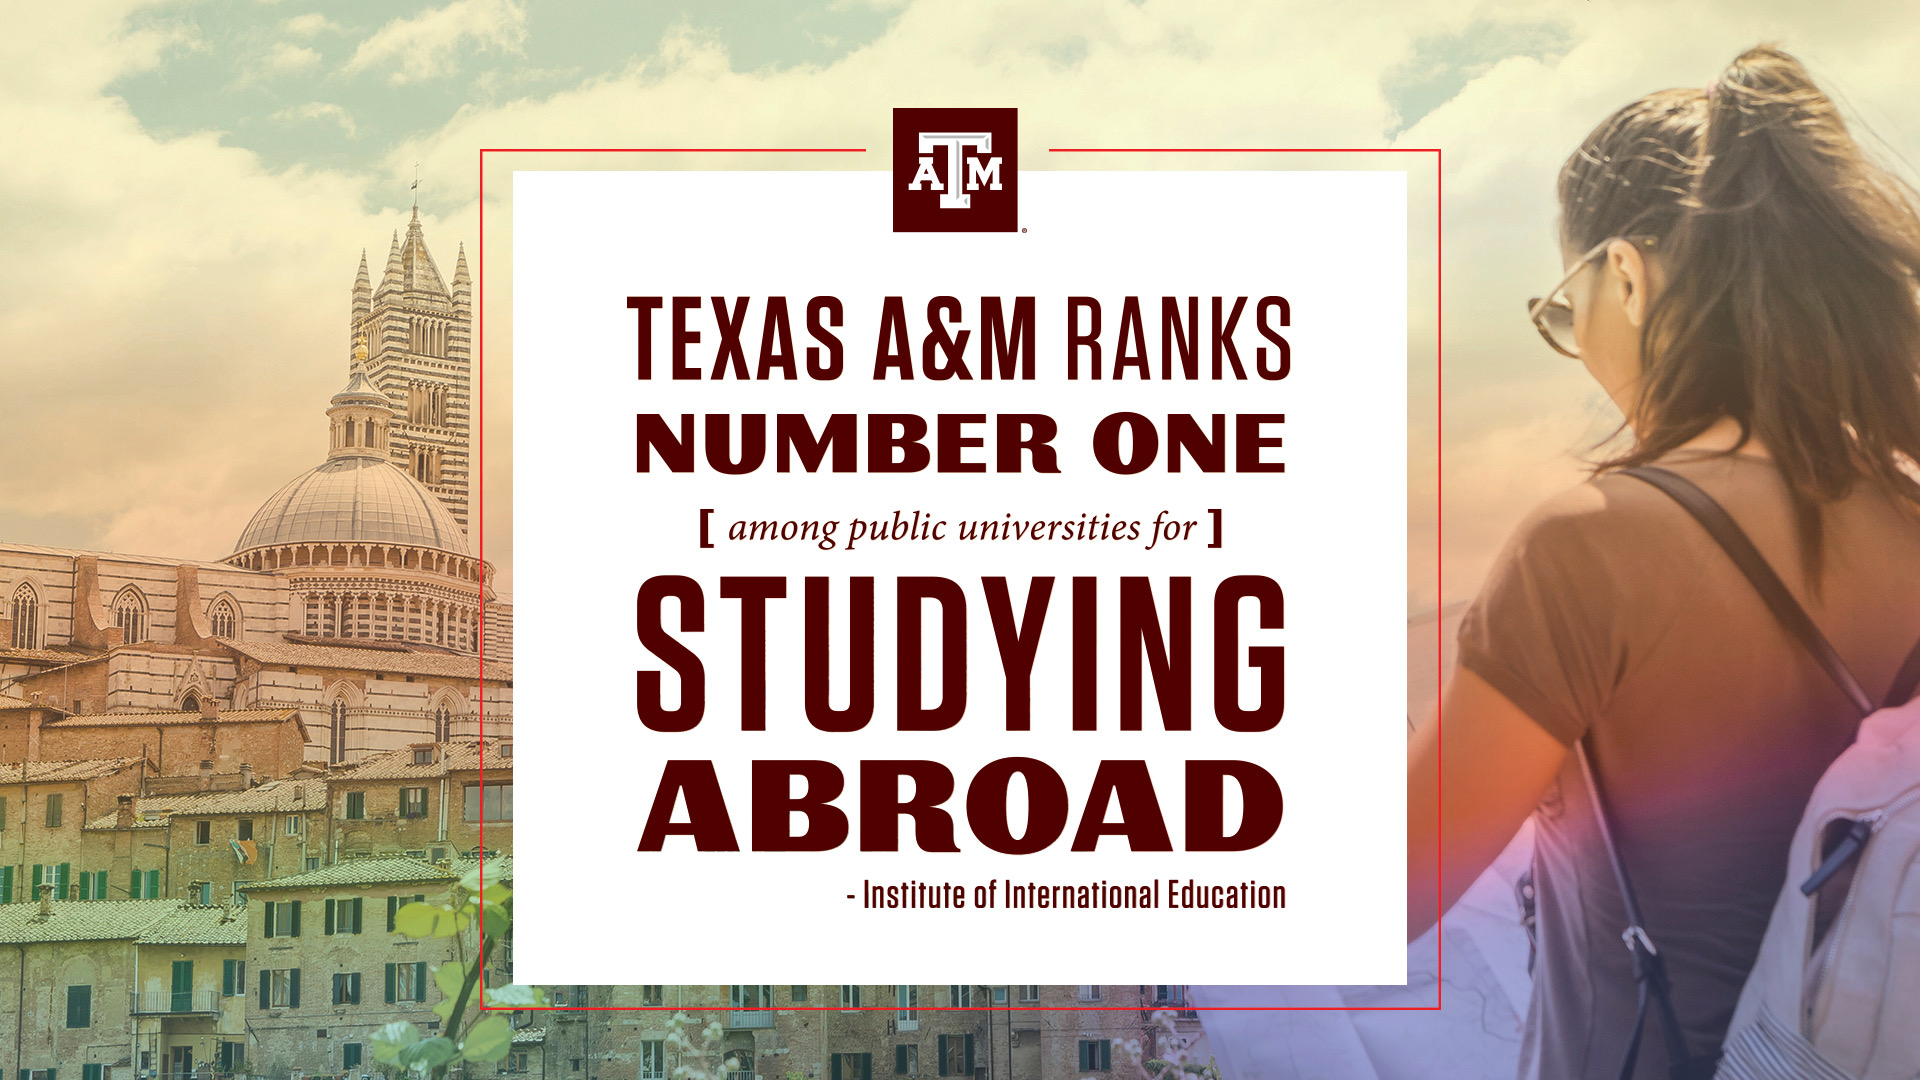 Texas A&M ranks #1 among public universities for studying abroad.